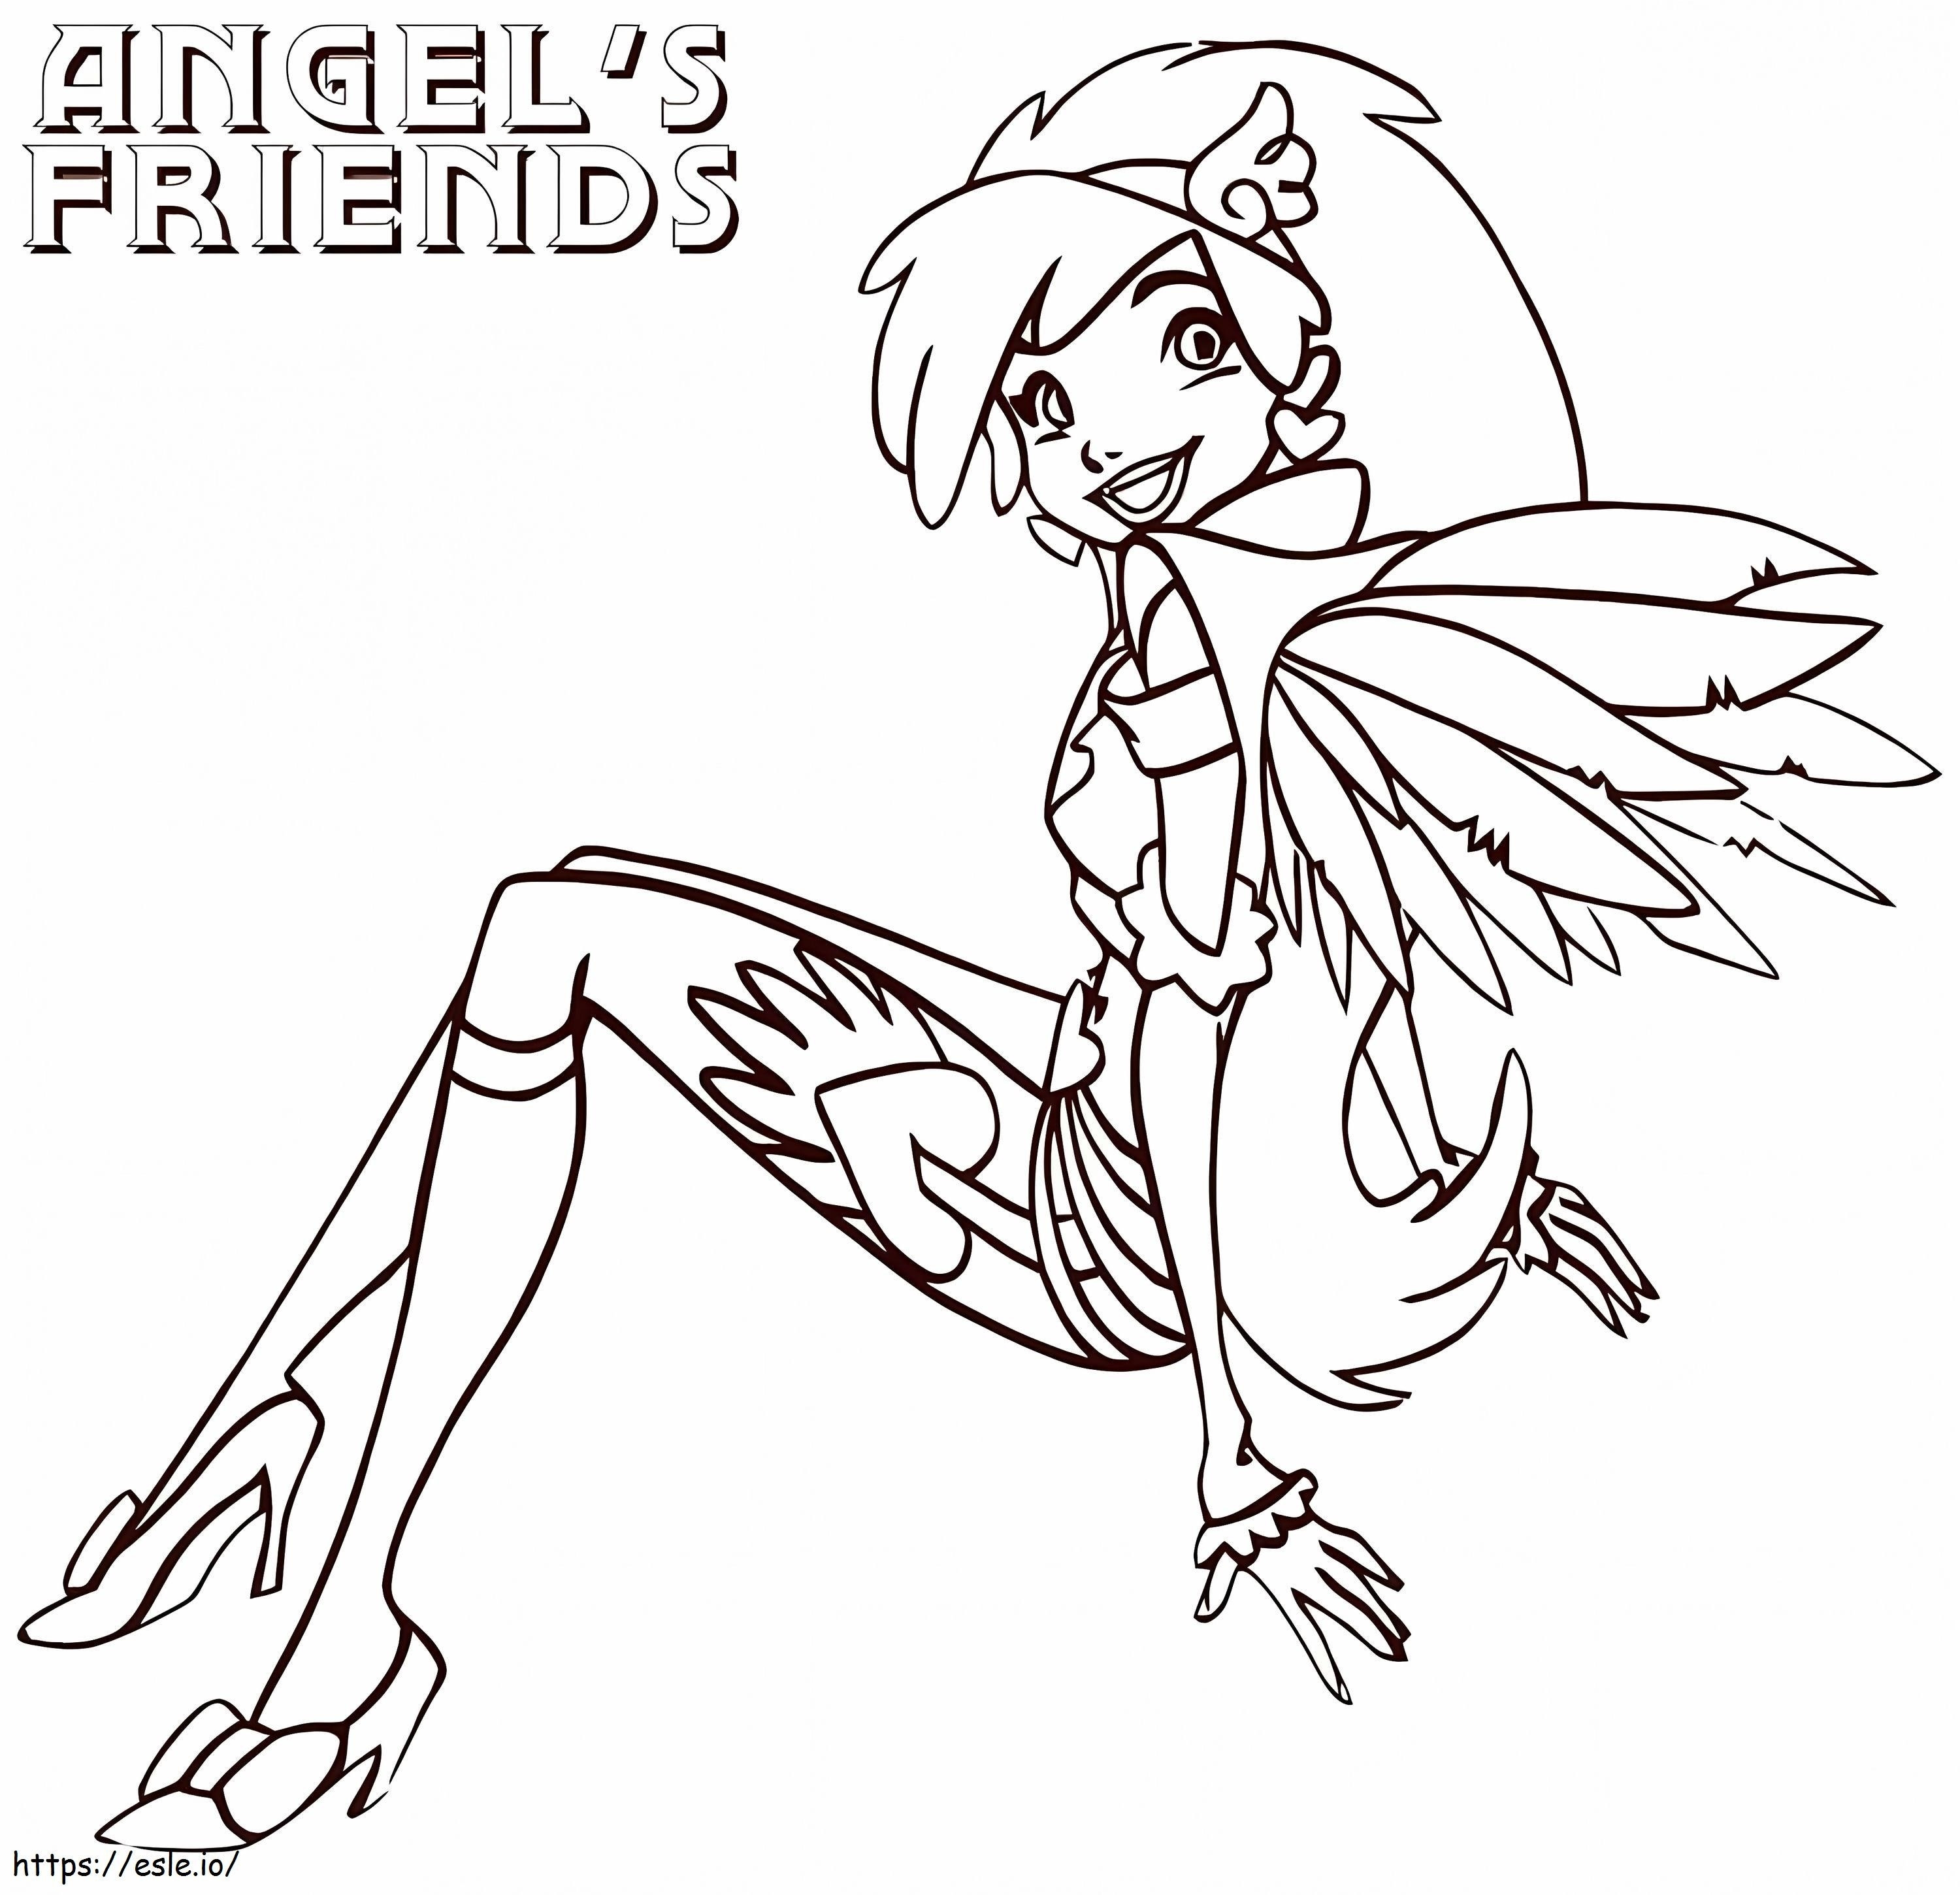 Dolce From Angels Friends coloring page